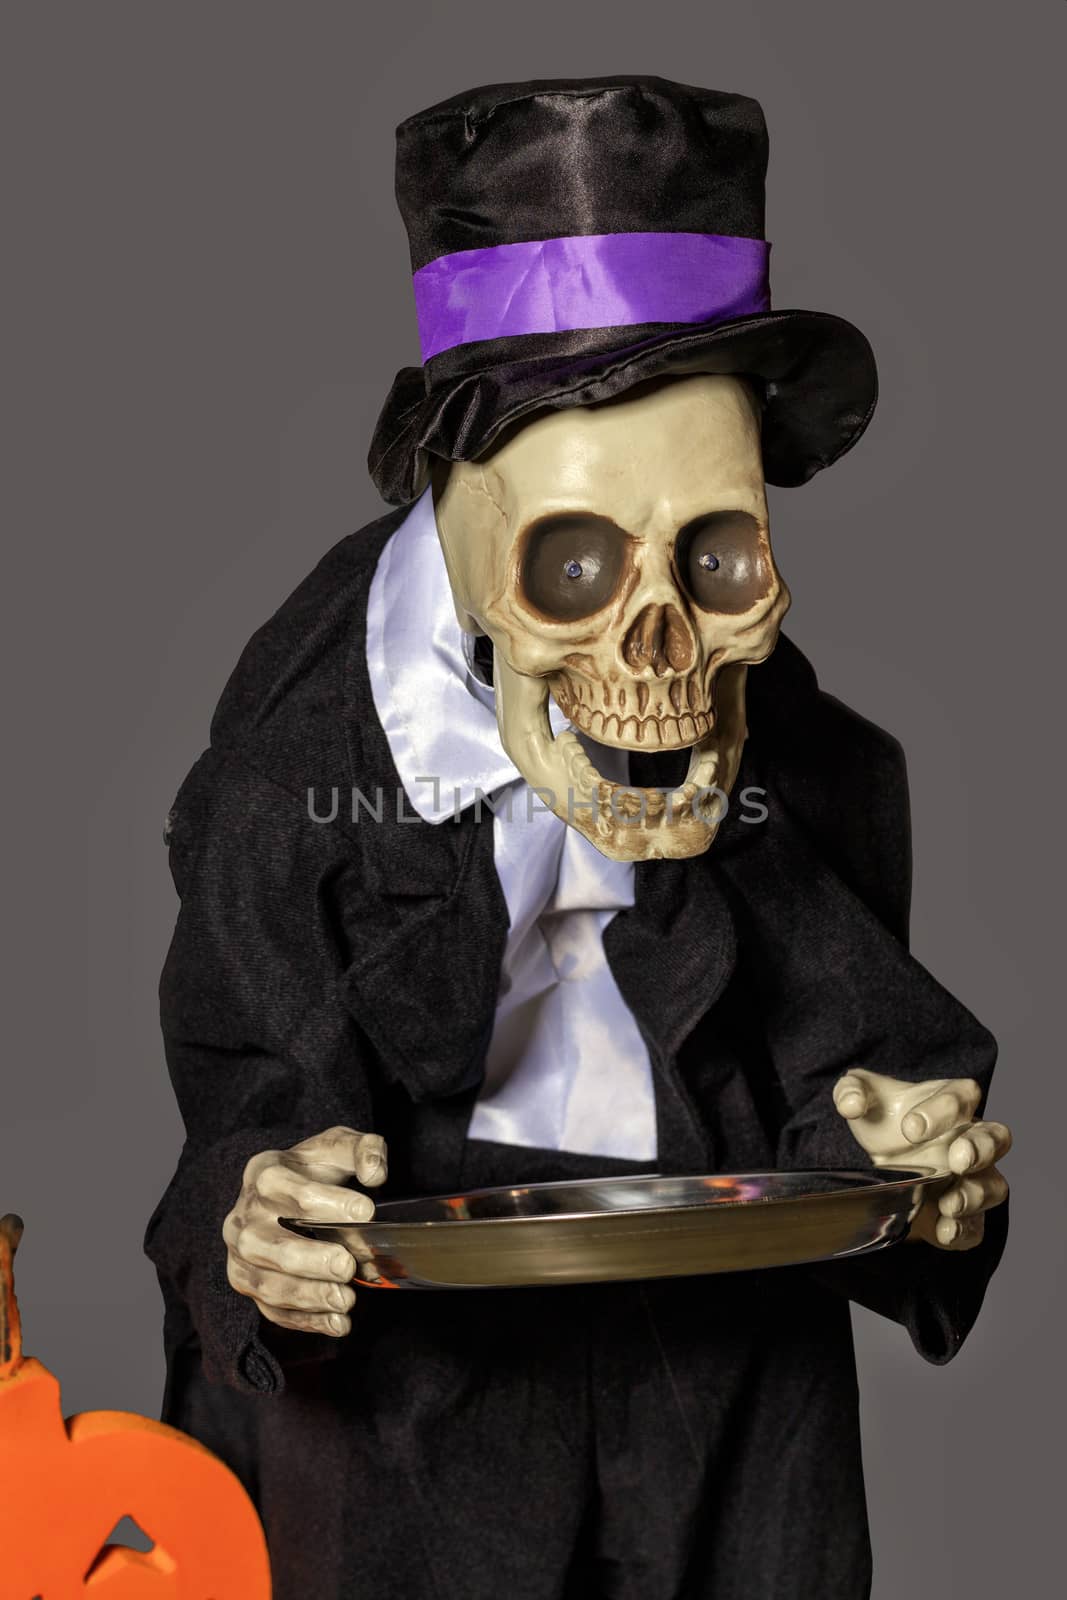 Halloween, doll Death in a black tailcoat and baggy hat with a metal tray in her hands came to collect tribute, isolated on a gray background.